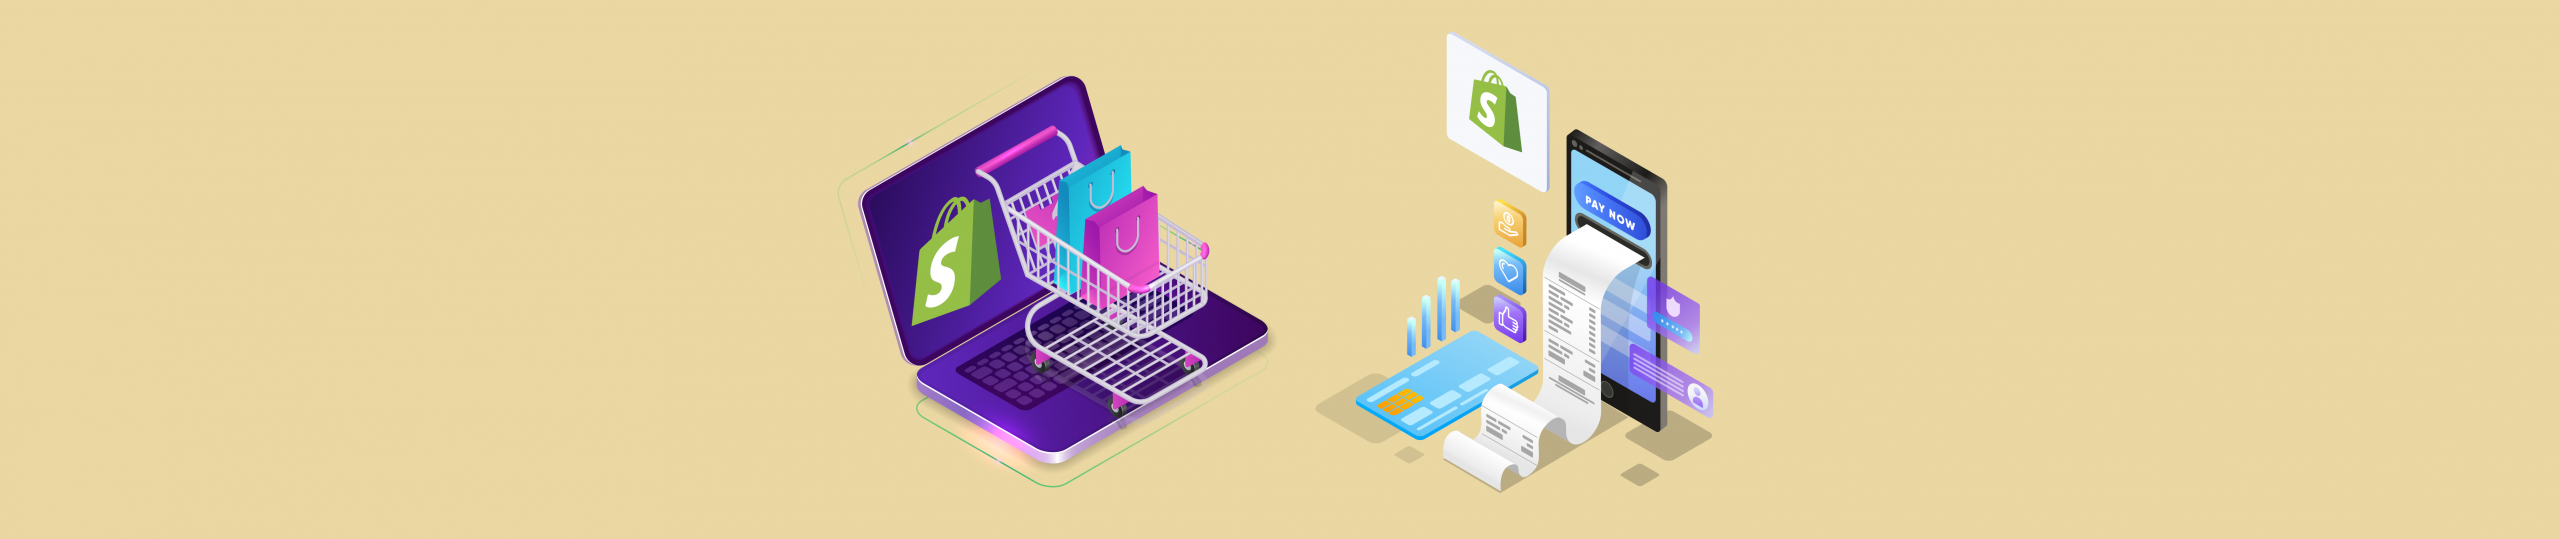 how to set up shopify payments